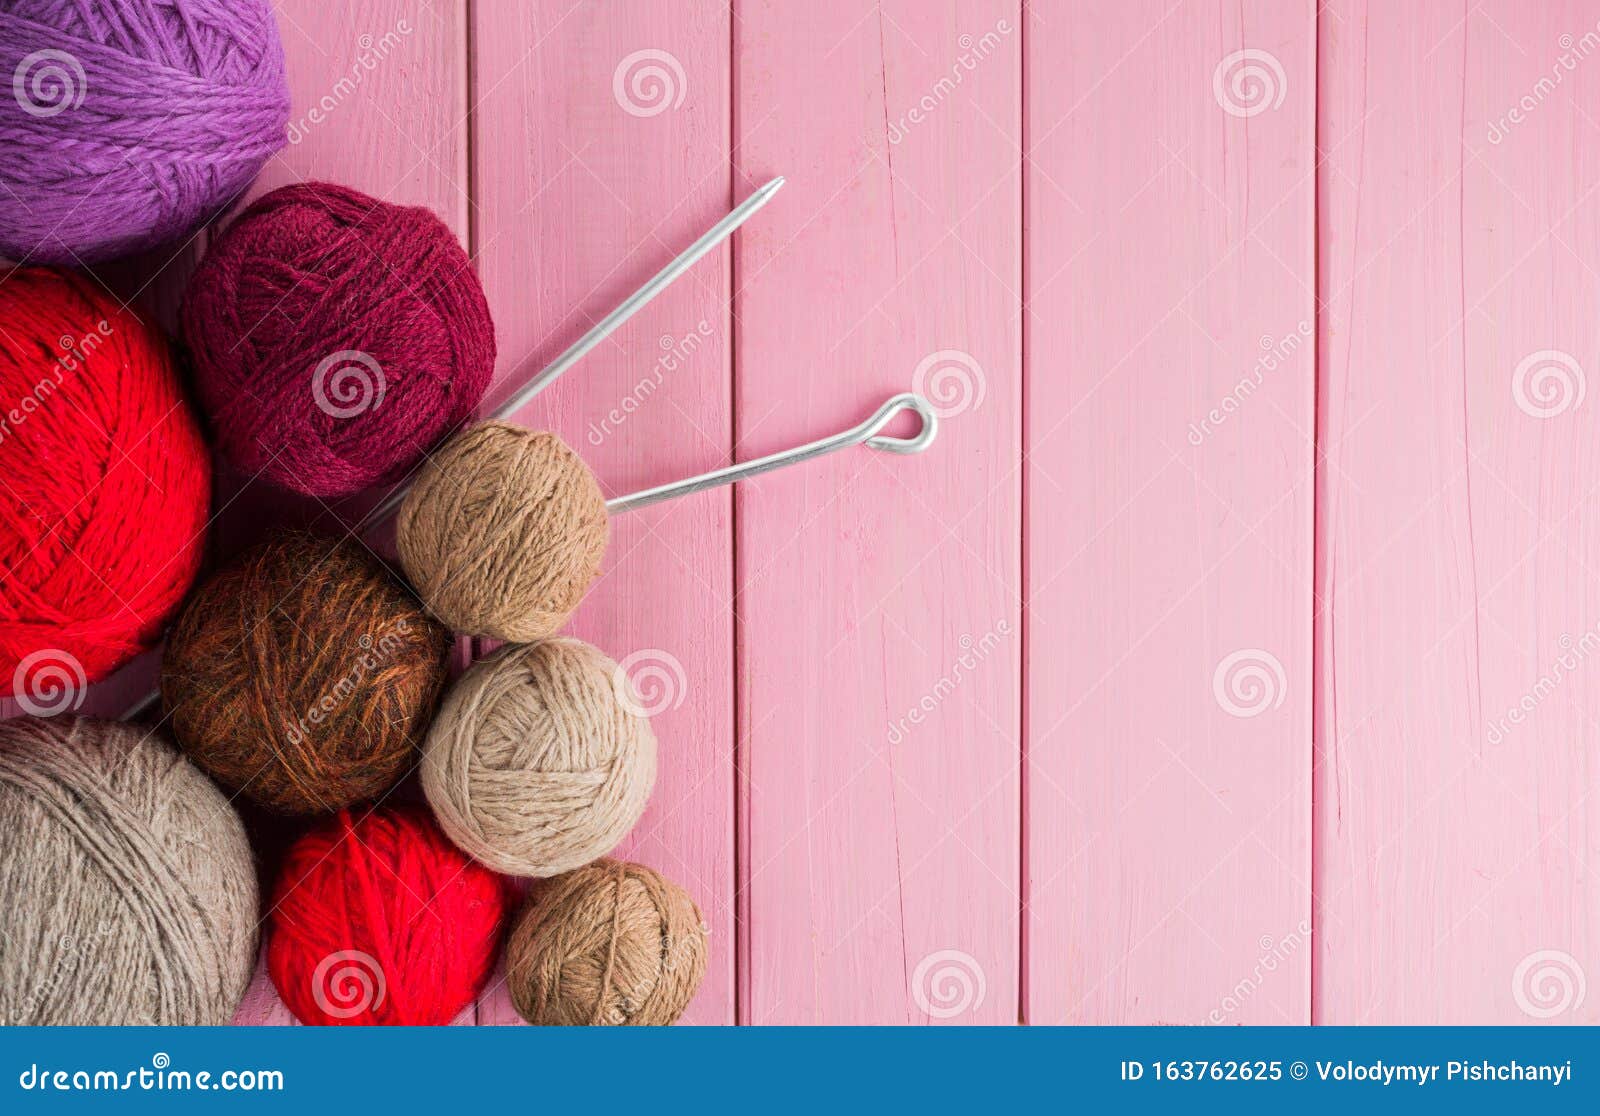 balls of yarn in different colors with knitting needles